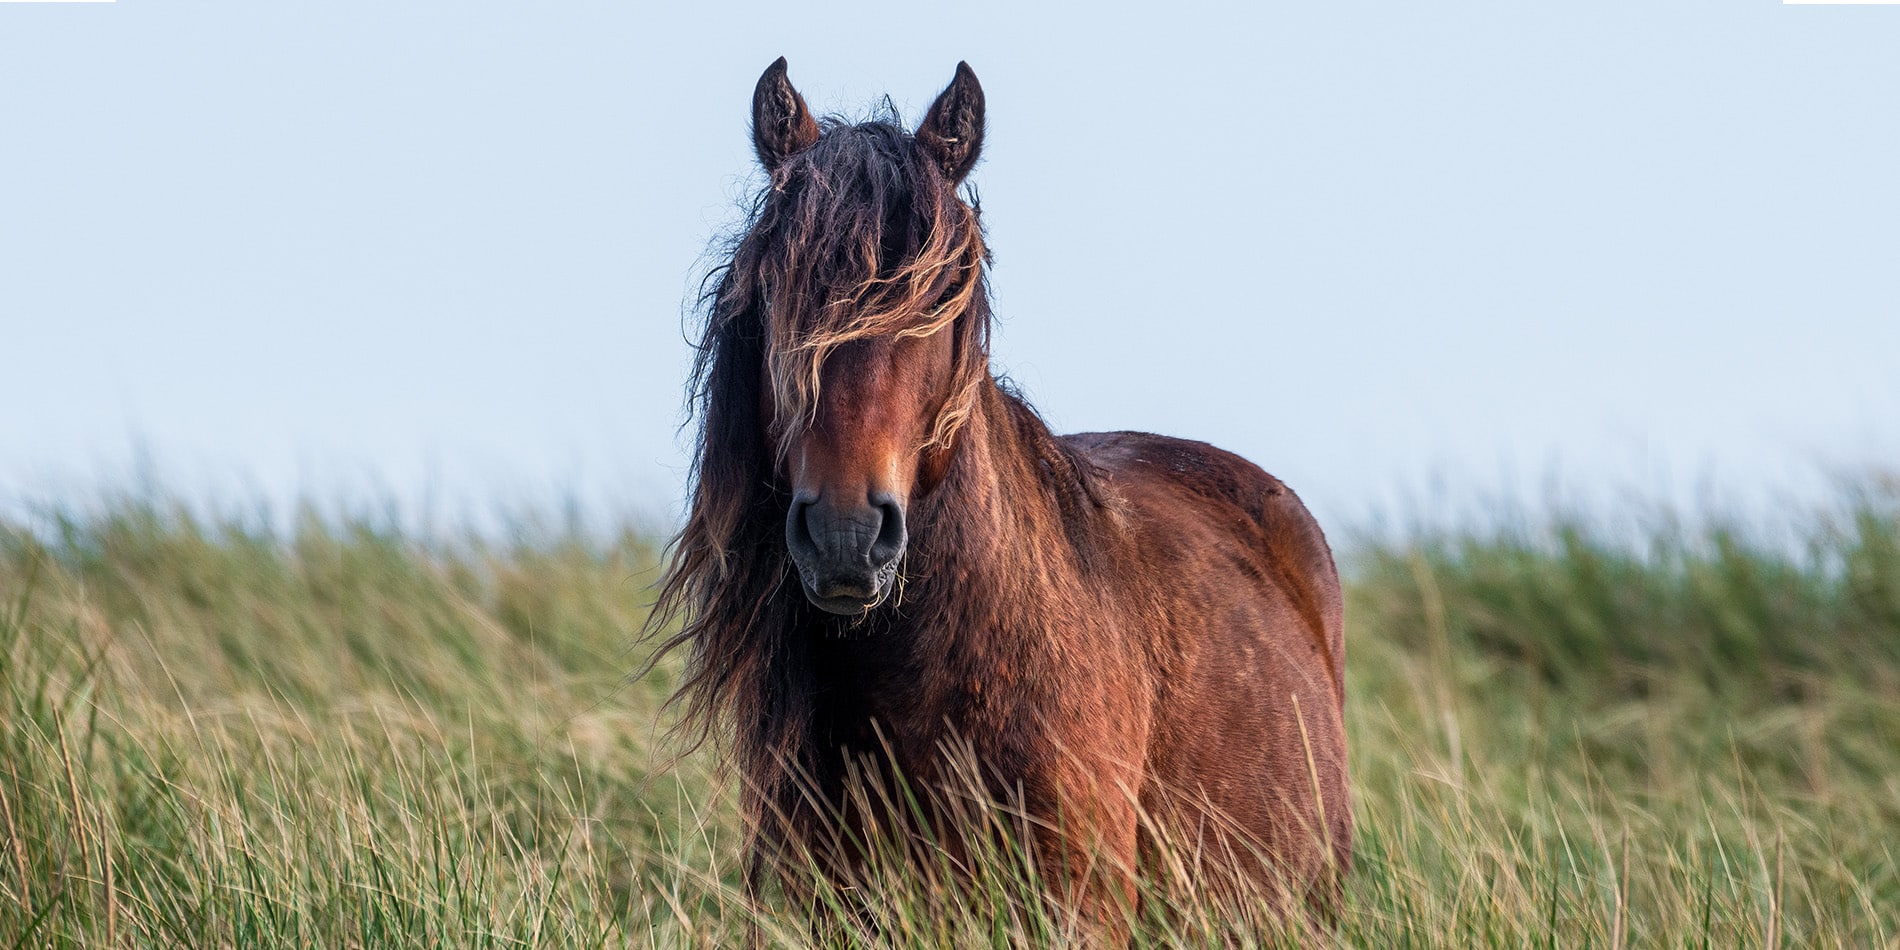 A wild horse in the marram grass on Sable Island, Nova Scotia - photo by Picture Perfect Tours and Geordie Mott